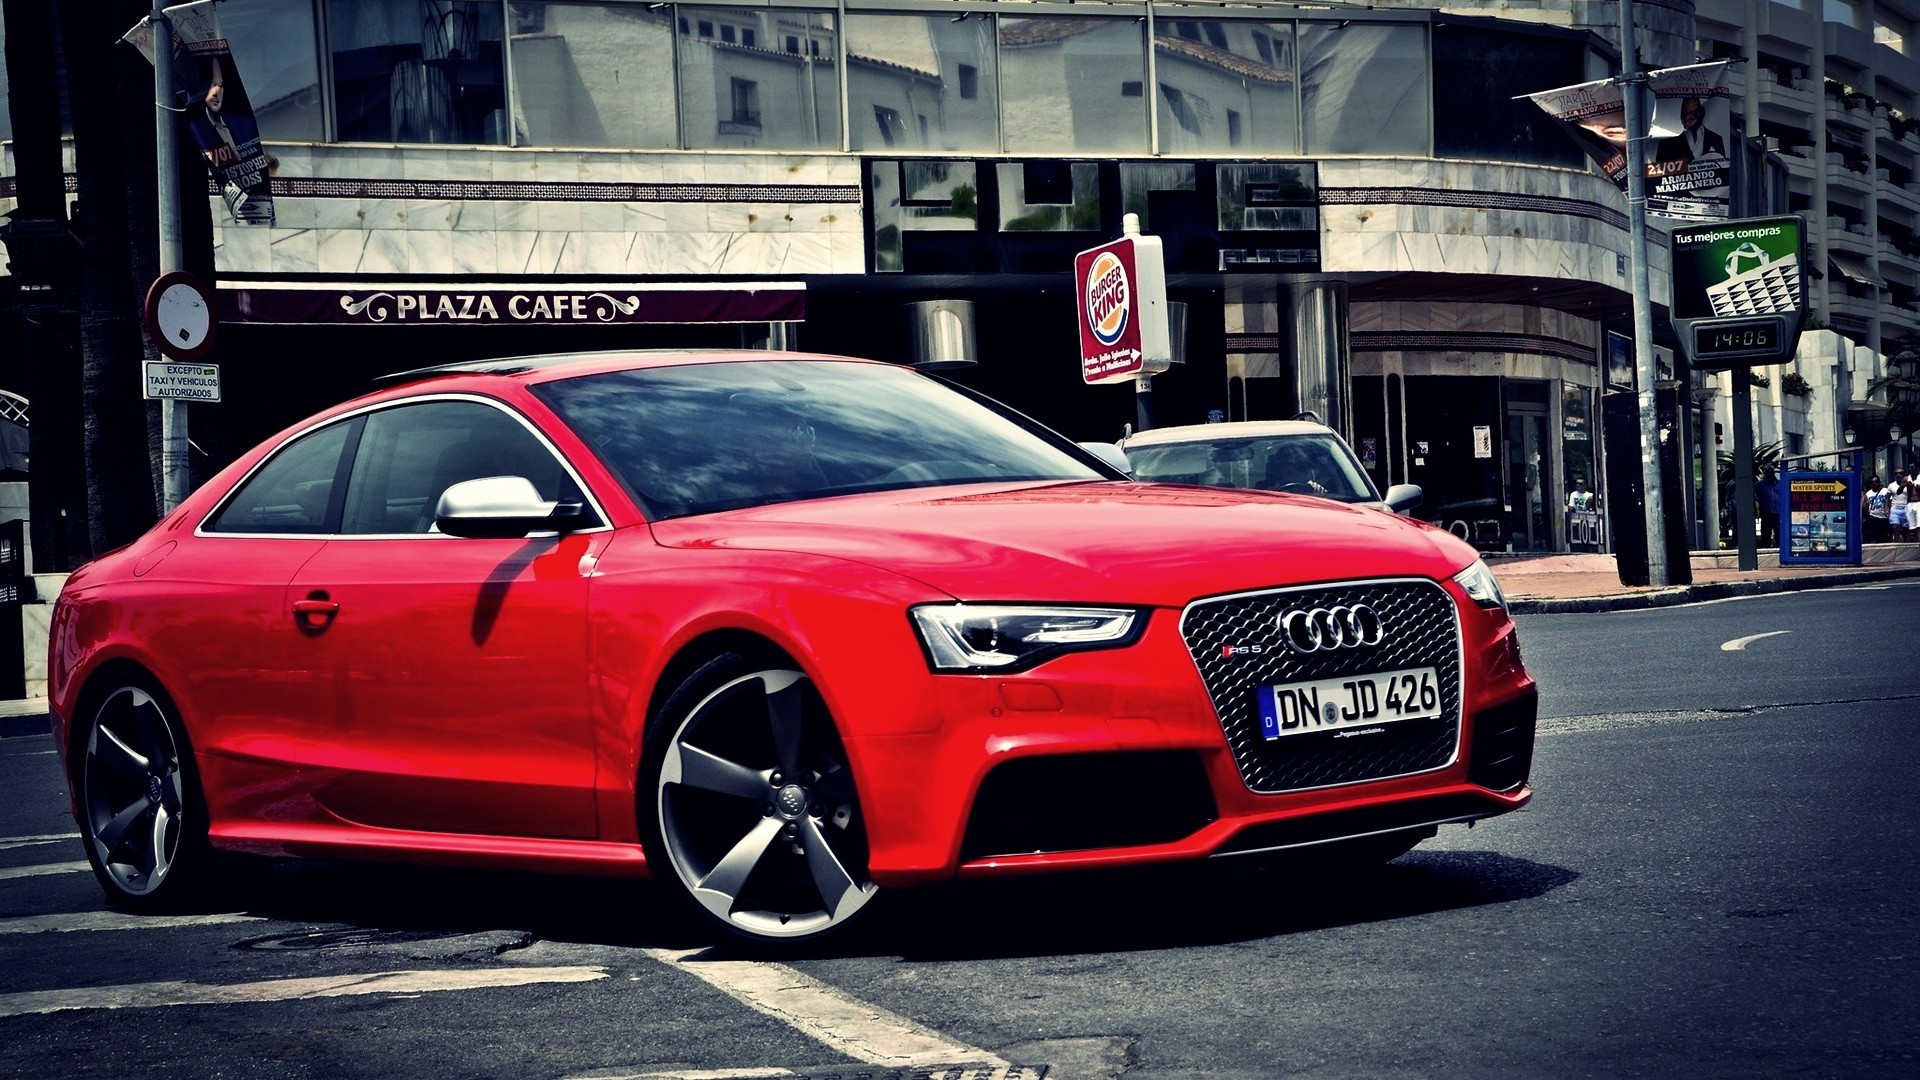 General 1920x1080 Audi Audi A5 car red cars vehicle numbers city German cars Volkswagen Group